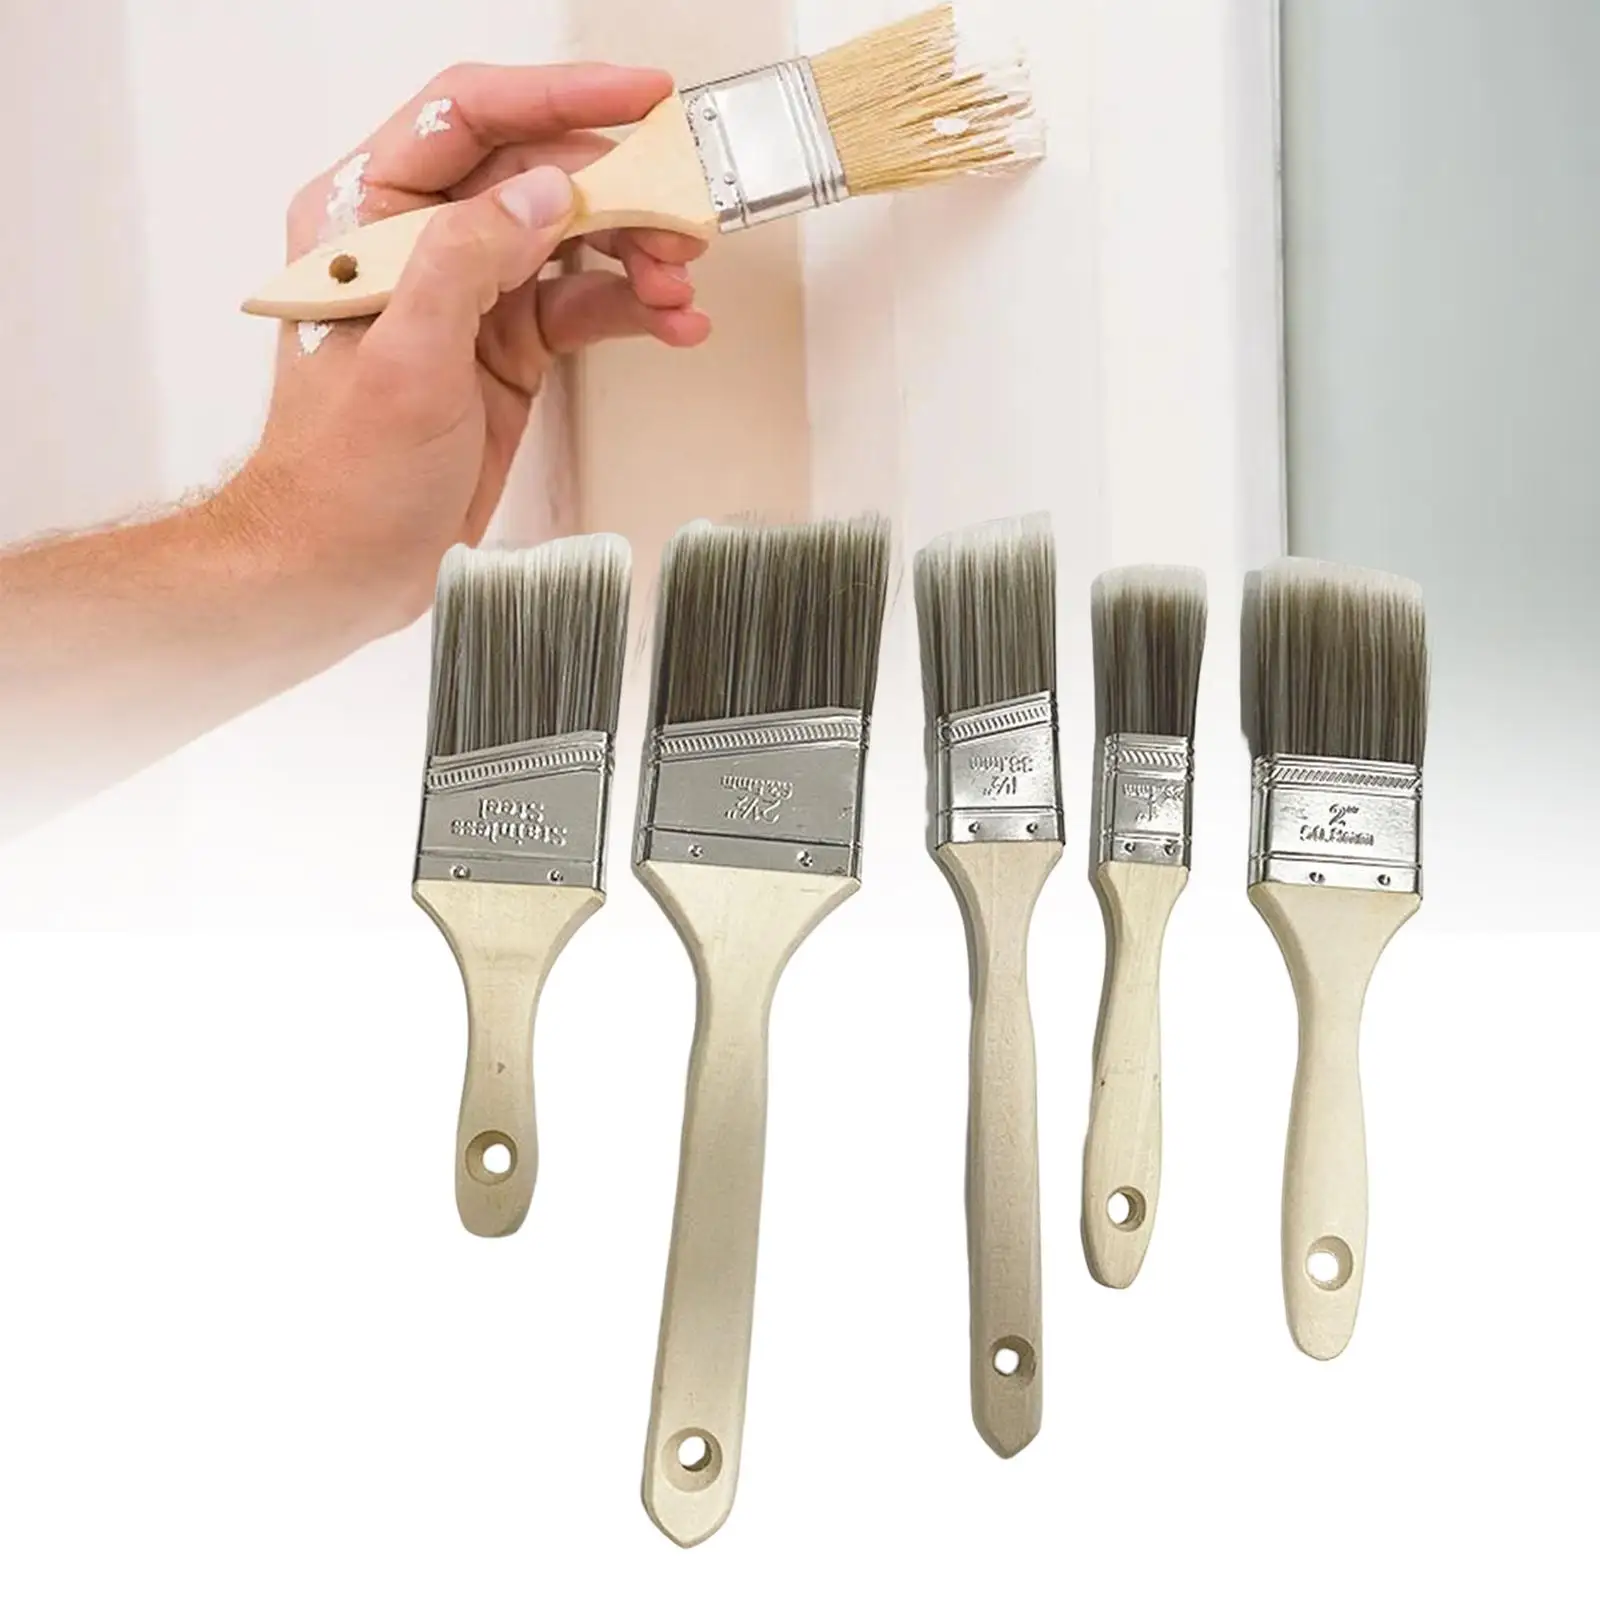 5x Paint Brushes Professional Wall Paint Brushes Wooden Handle Brushes for Furniture Doors Walls Cabinets Home Renovations